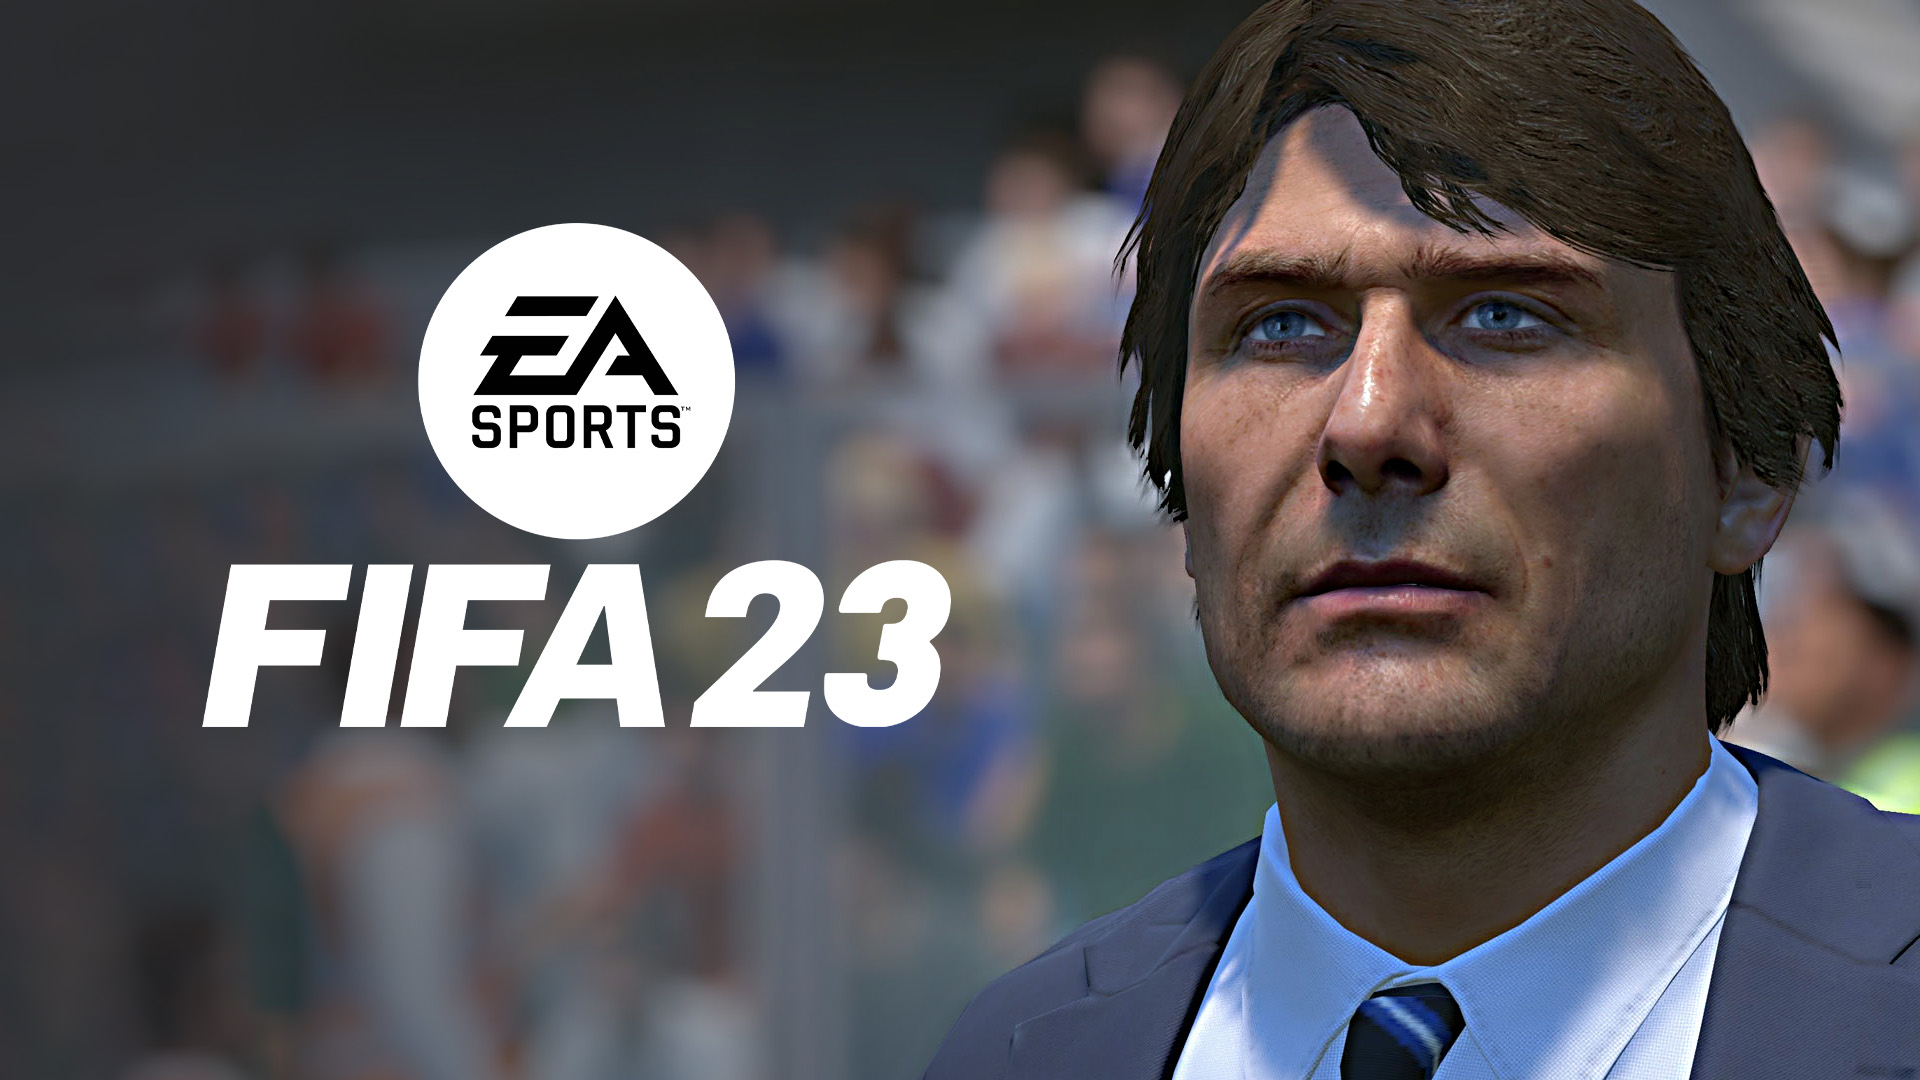 FIFA 23 Career Mode: Personality, highlights, managers